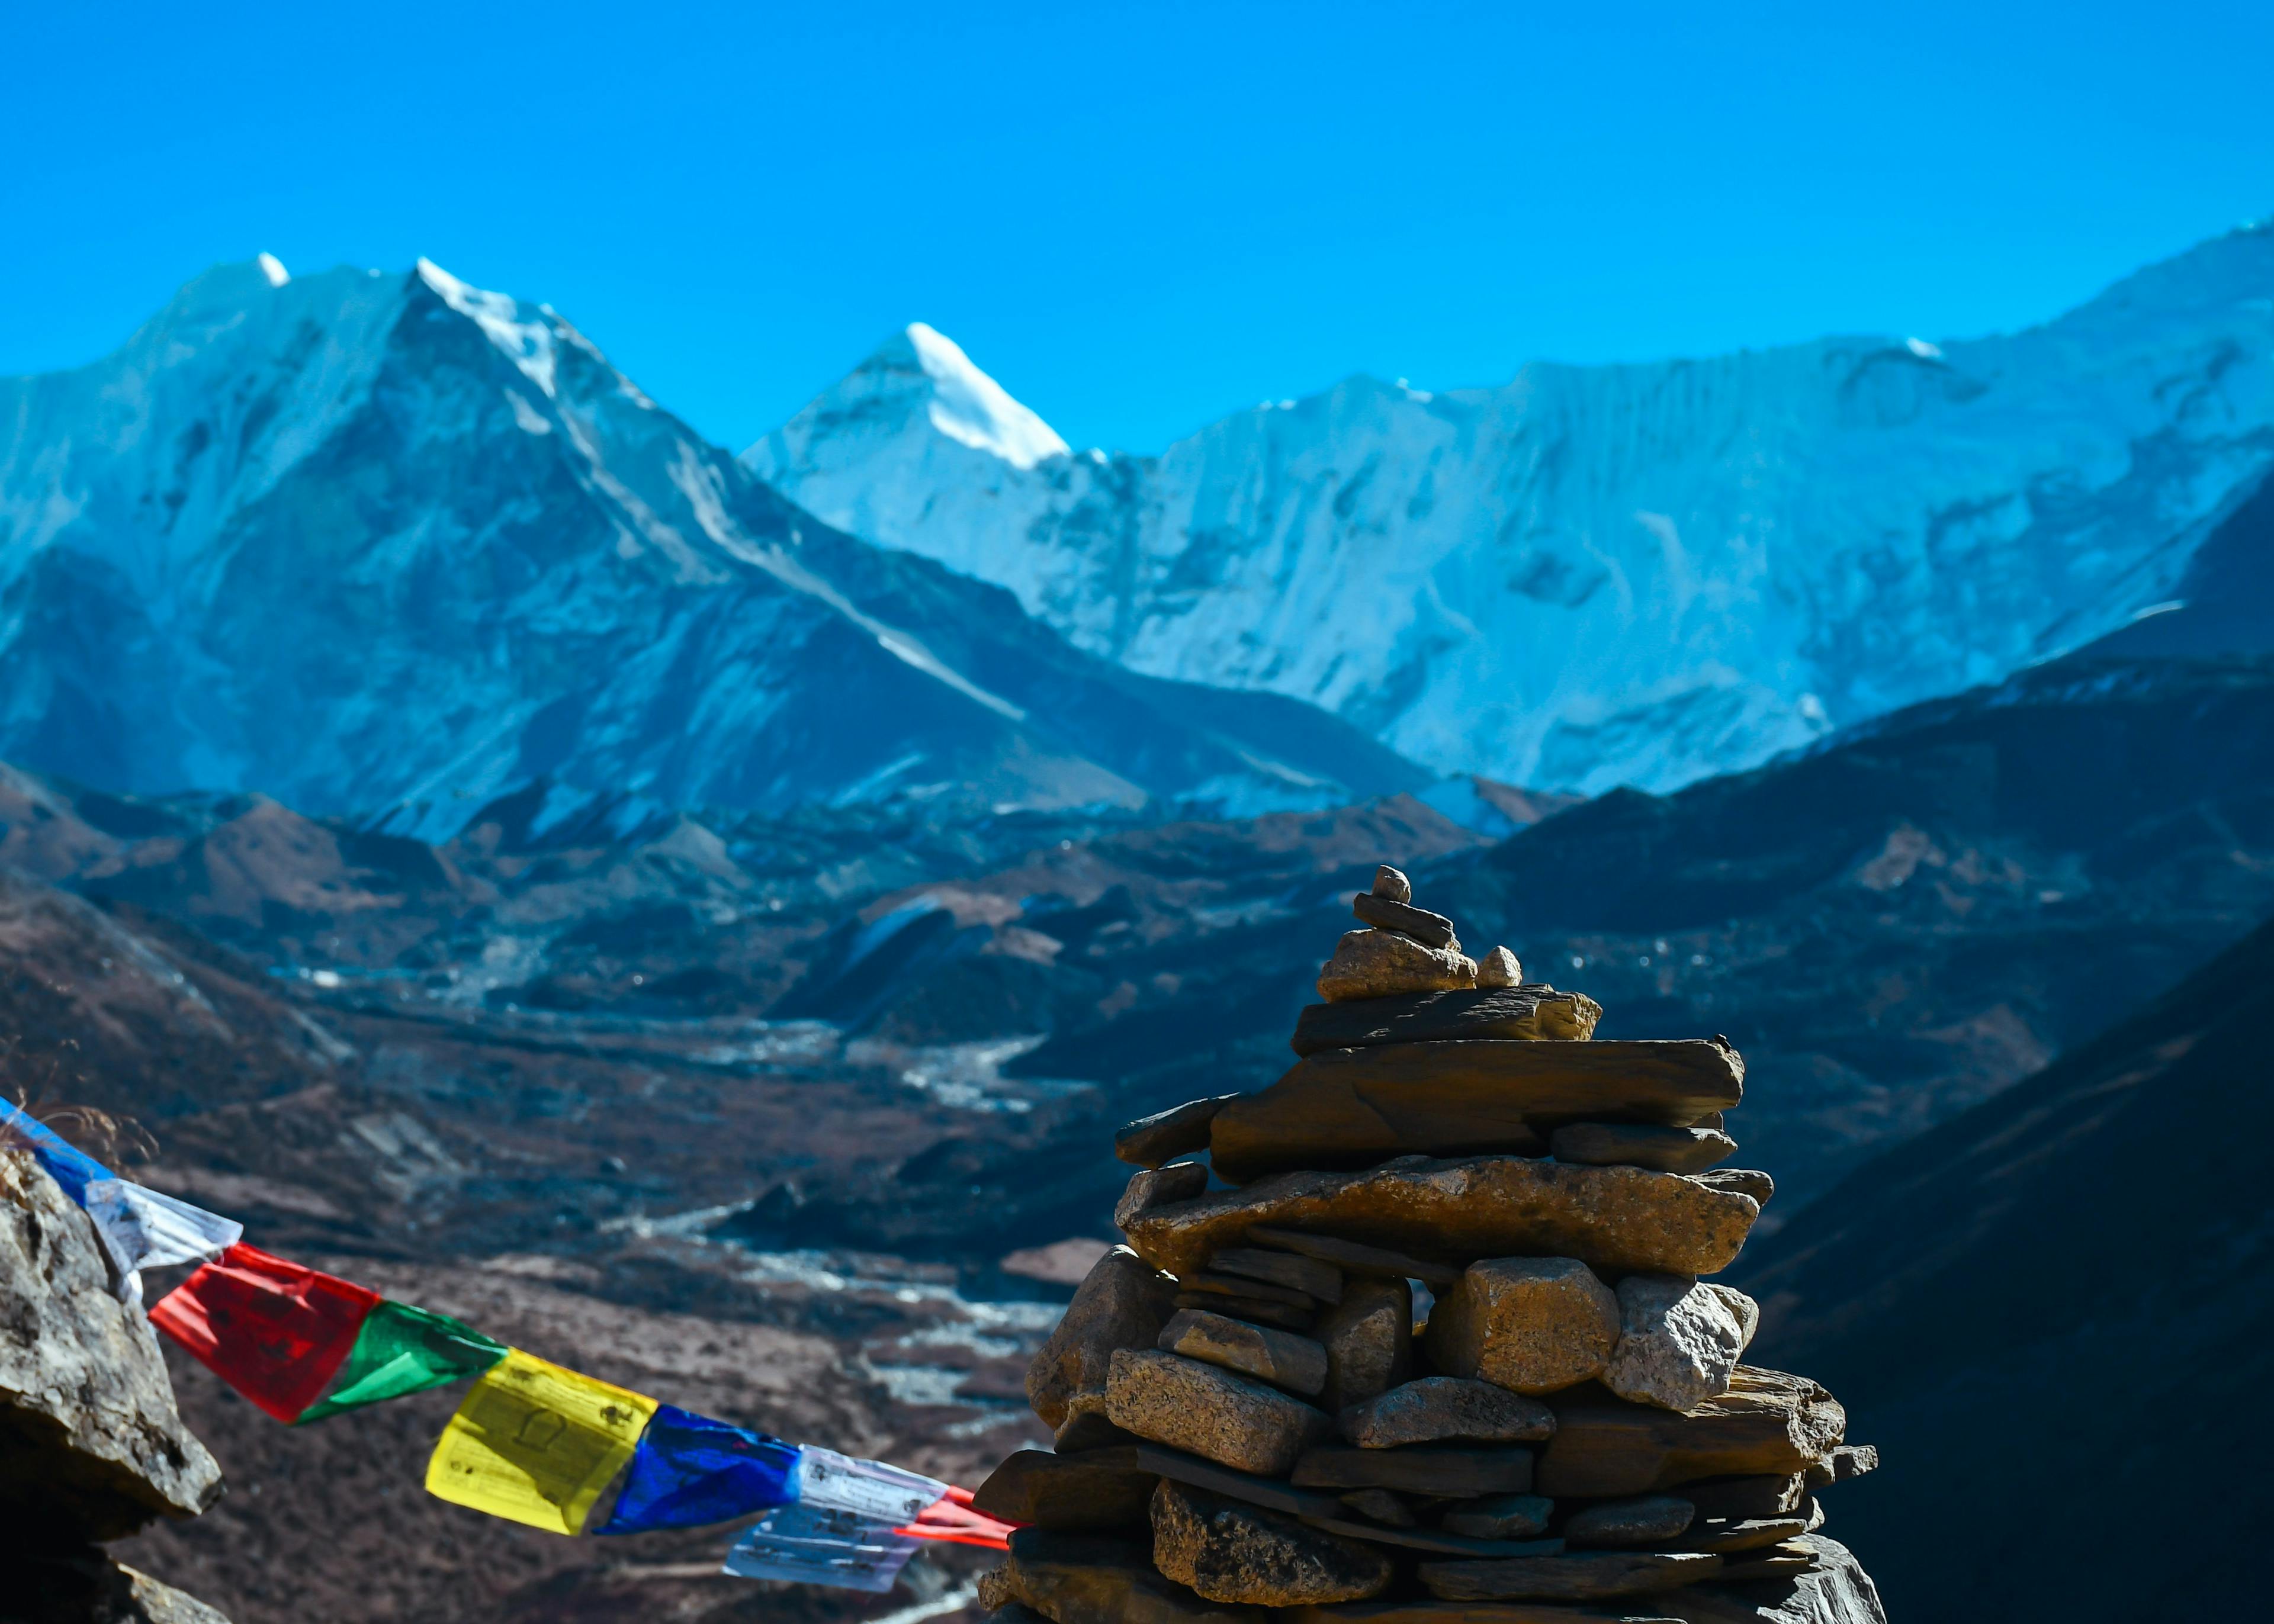 Everest Base Camp Trek from Malaysia: An Adventure of a Lifetime